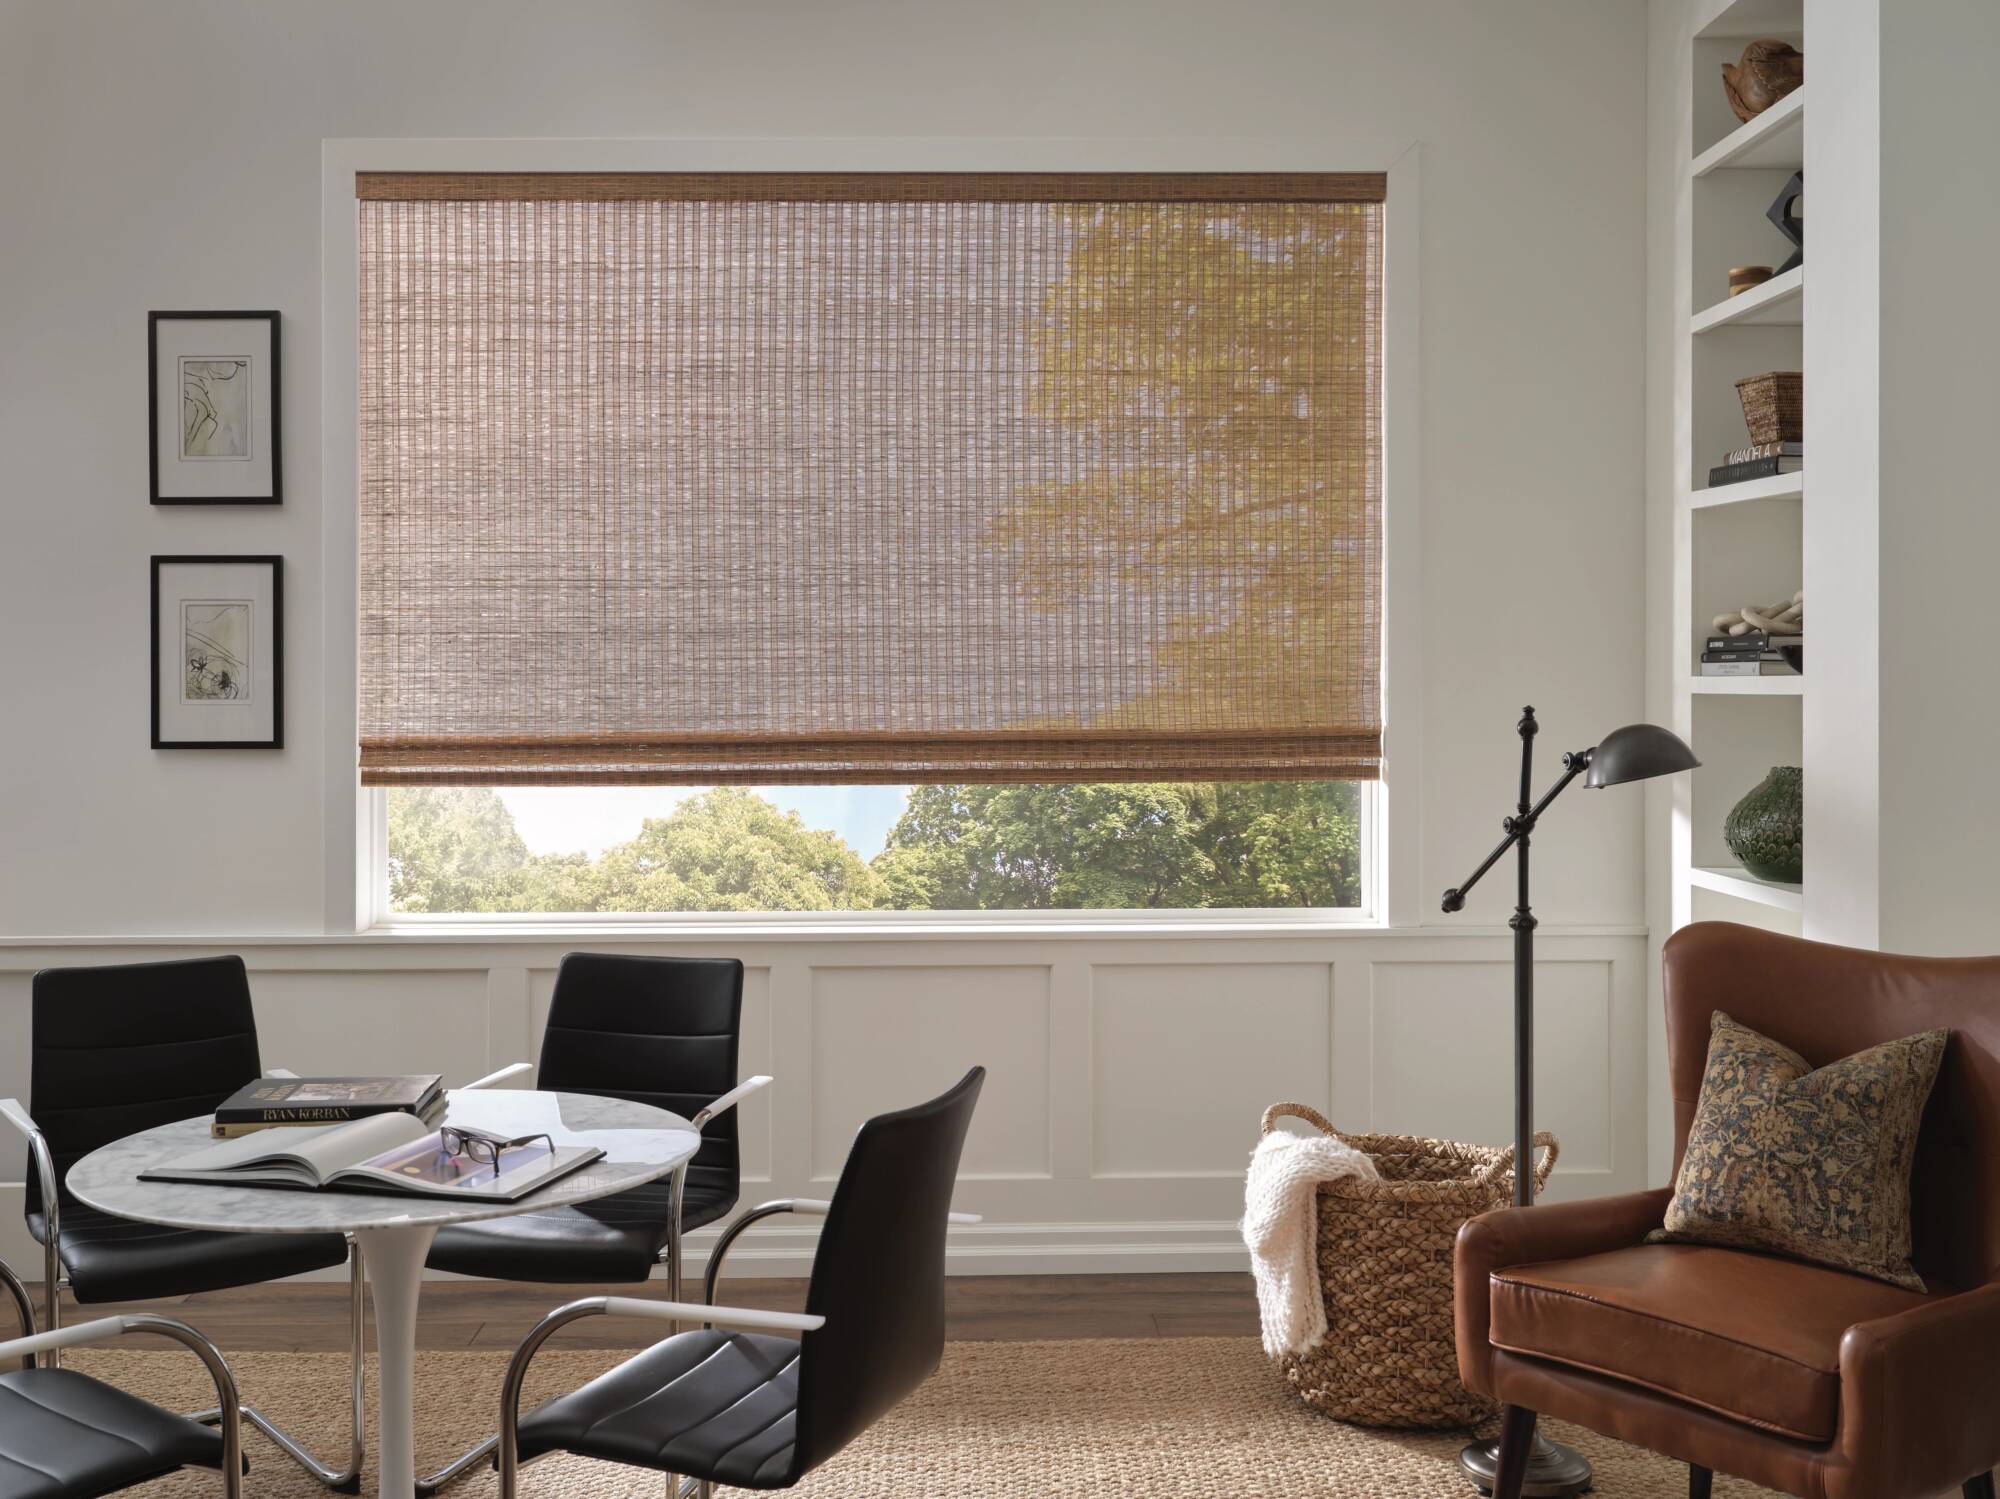 Hunter douglas provenance natural woven wood shades with powerview motorization